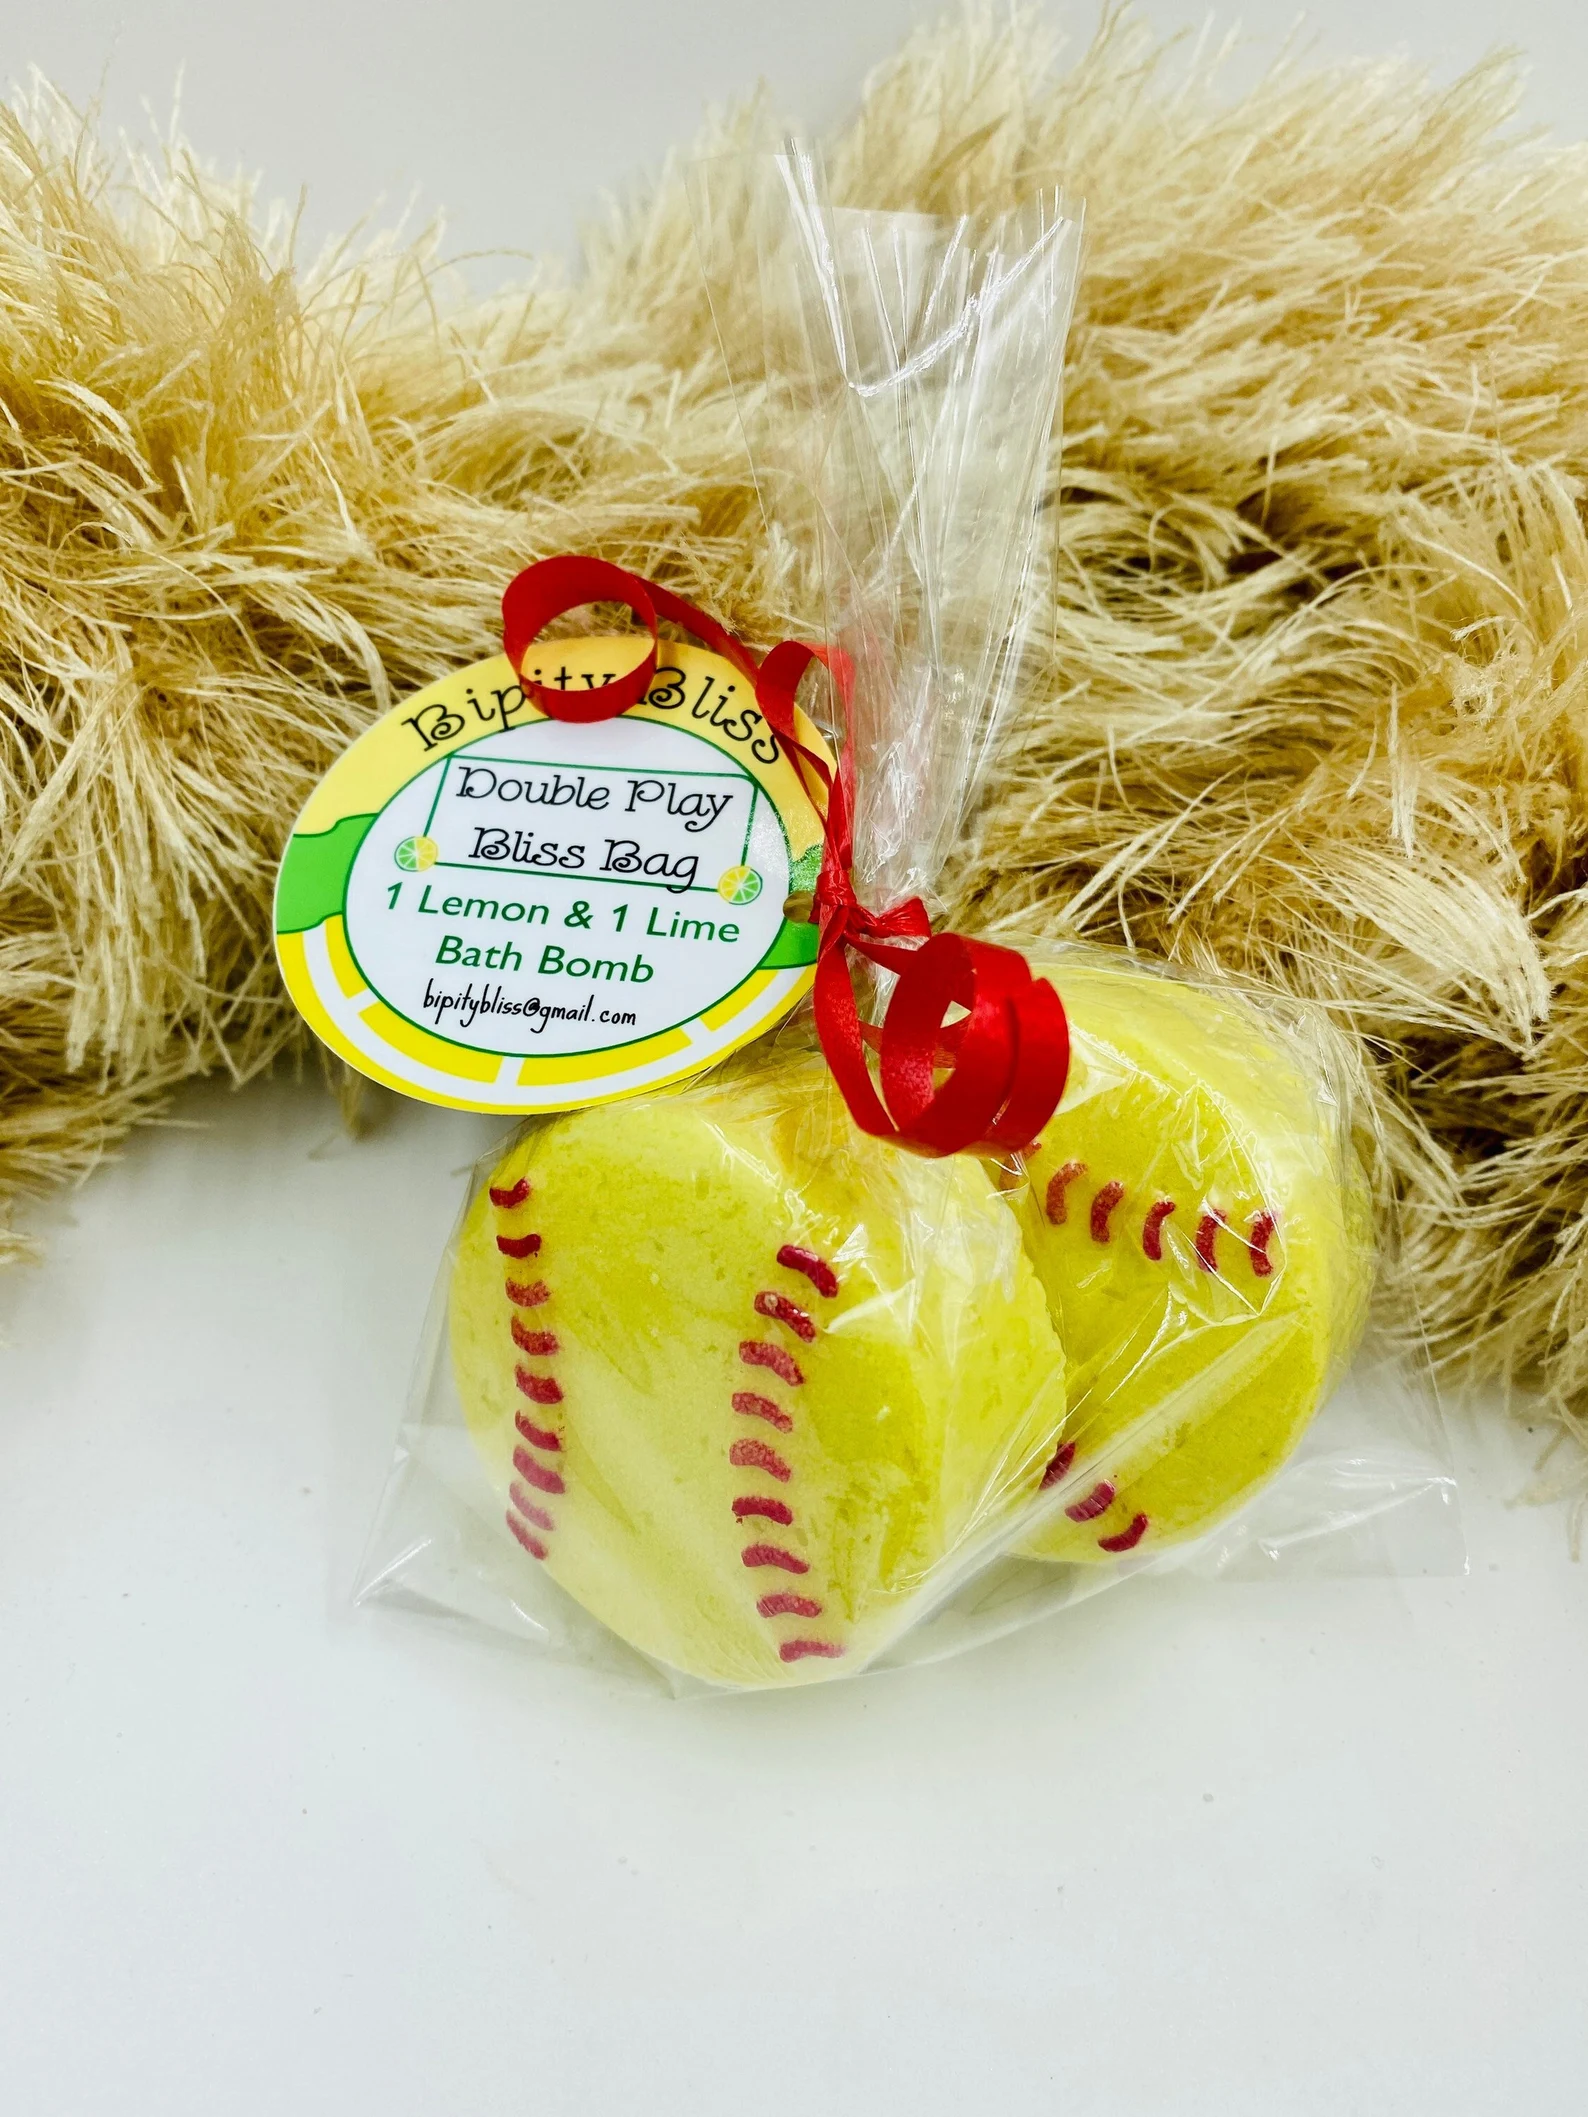 The perfect gift for your softball player doesn't have to be softball-playing related to be awesome! Help her relax with some of the best softball gifts: bath bombs!